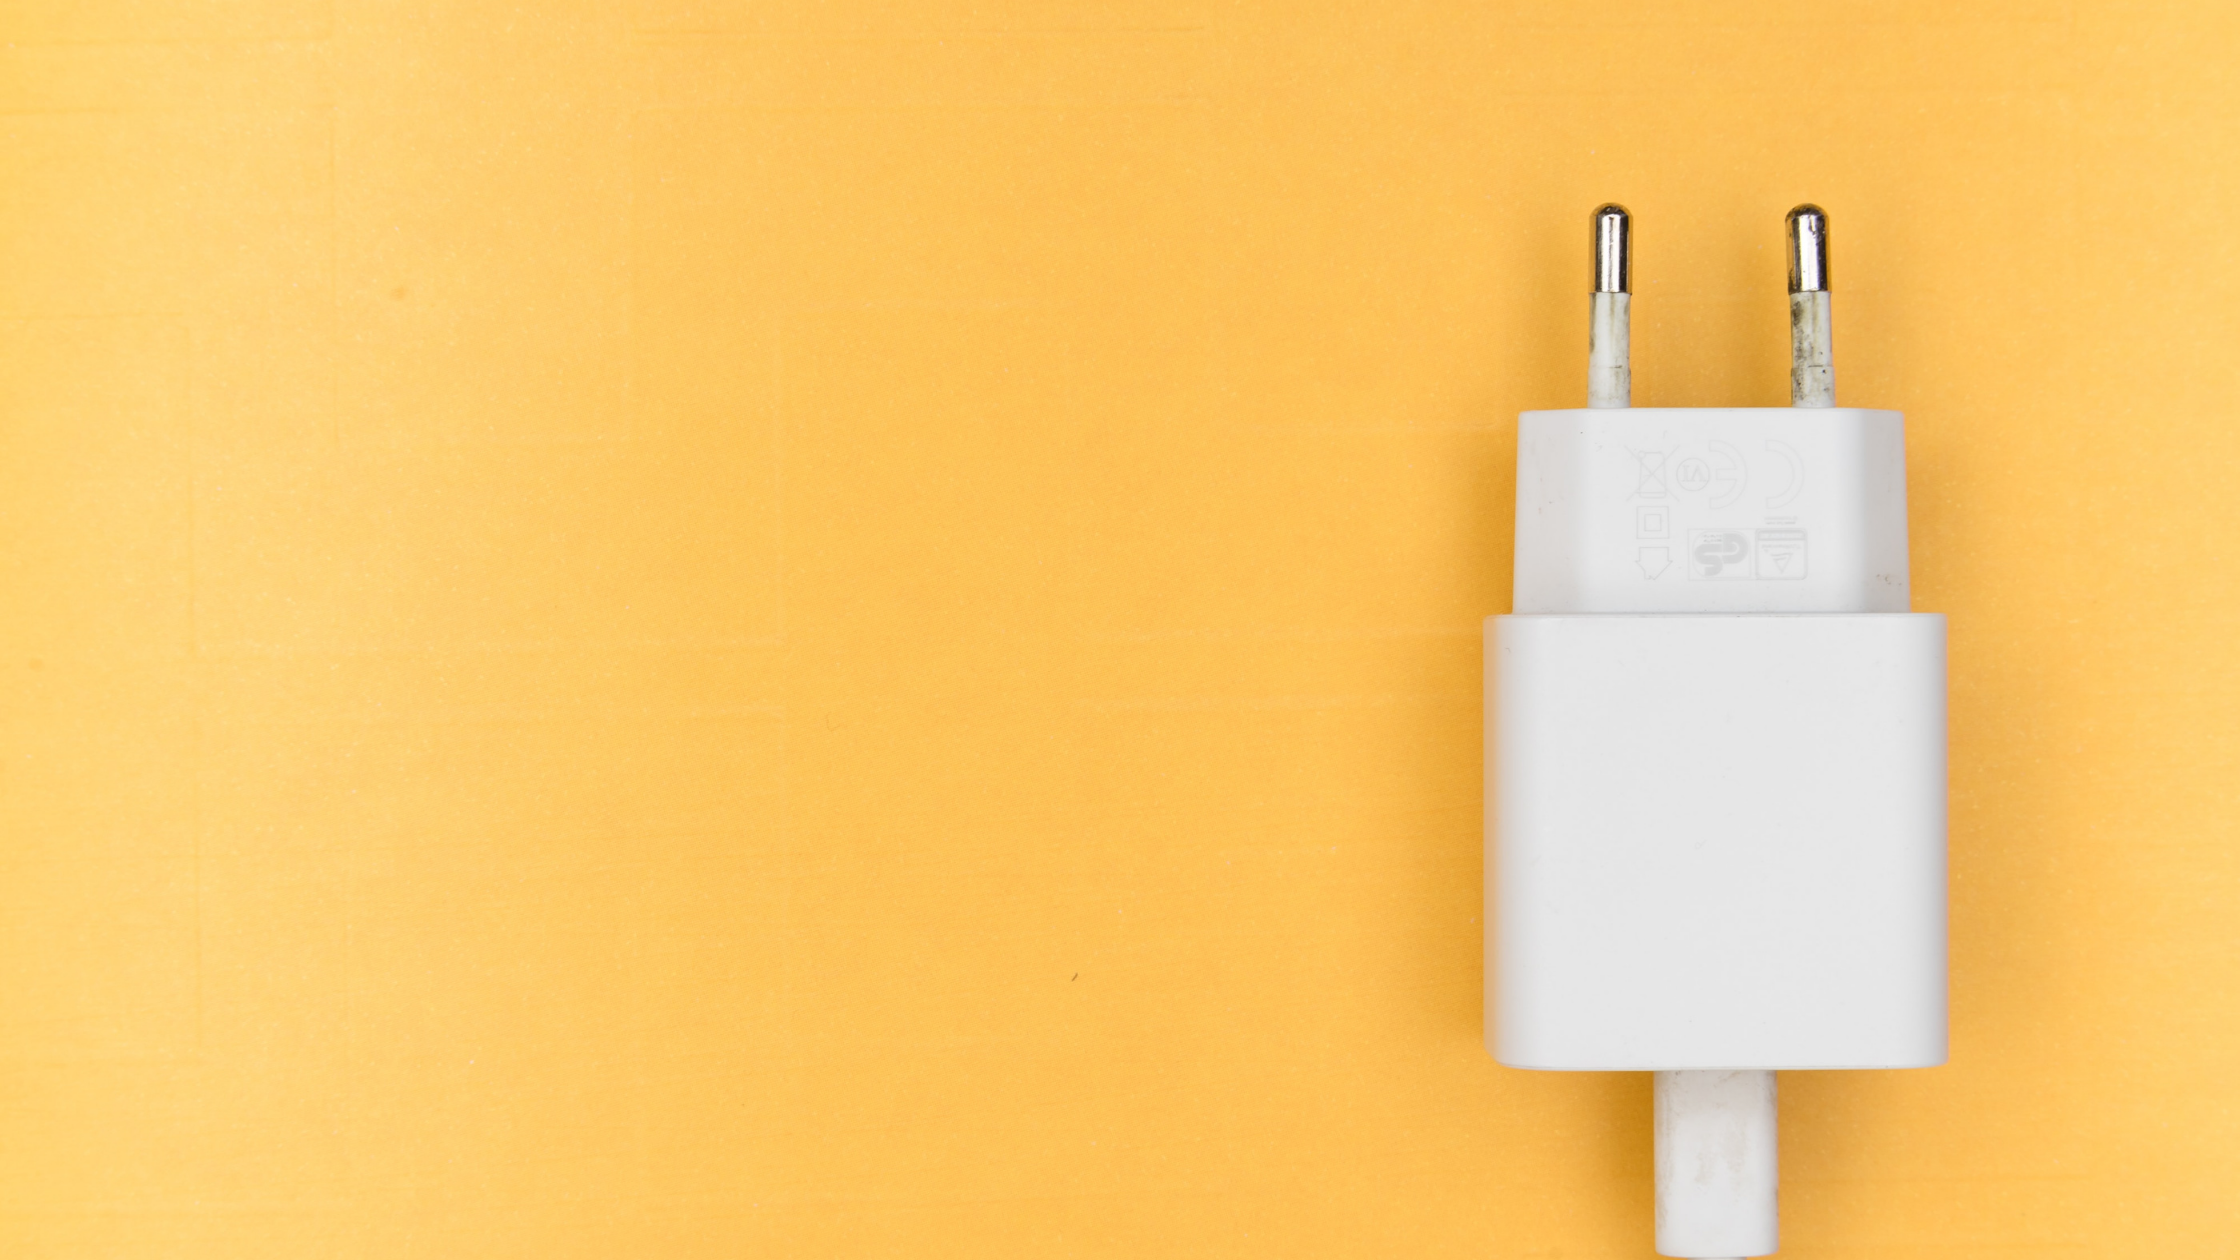 A plug against a yellow background